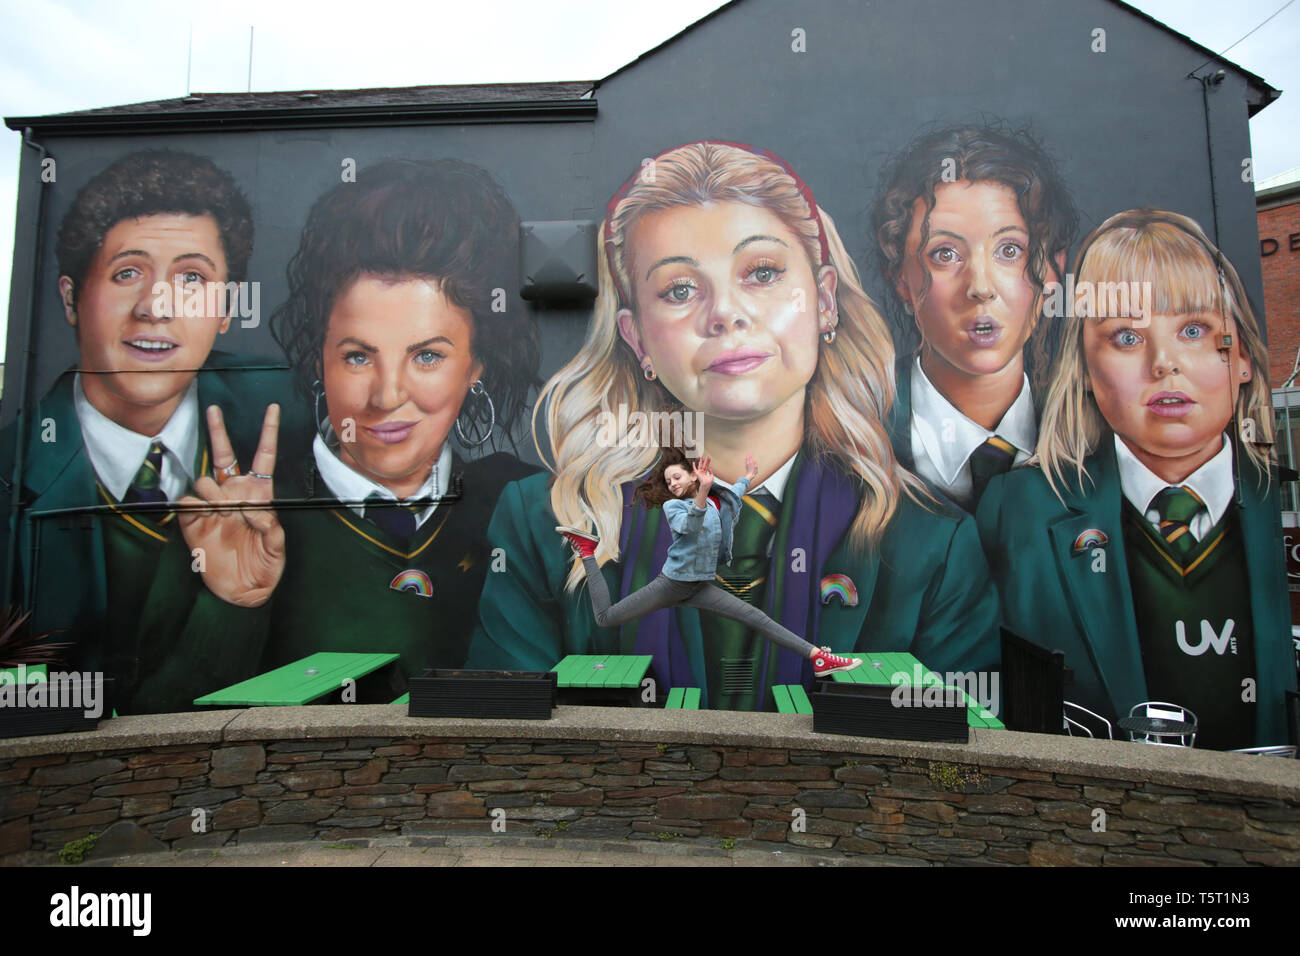 Derry, County Londonderry, Northern Ireland, 25th April, 2019 .A young girl jumps in front of a mural showing characters from the Channel 4 TV hit show Derry Girls in Derry/Londonderry, Northern Ireland. Derry Girls is a British television sitcom created and written by Lisa McGee. Staring Erin (Saoirse-Monica Jackson), her cousin Orla (Louisa Harland) and their friends Clare (Nicola Coughlan), Michelle (Jamie-Lee O'Donnell) and Michelle's English cousin James (Dylan Llewellyn) navigate their teen years during the Troubles in Derry, where they all attend a Catholic girls' secondary school. Erin Stock Photo